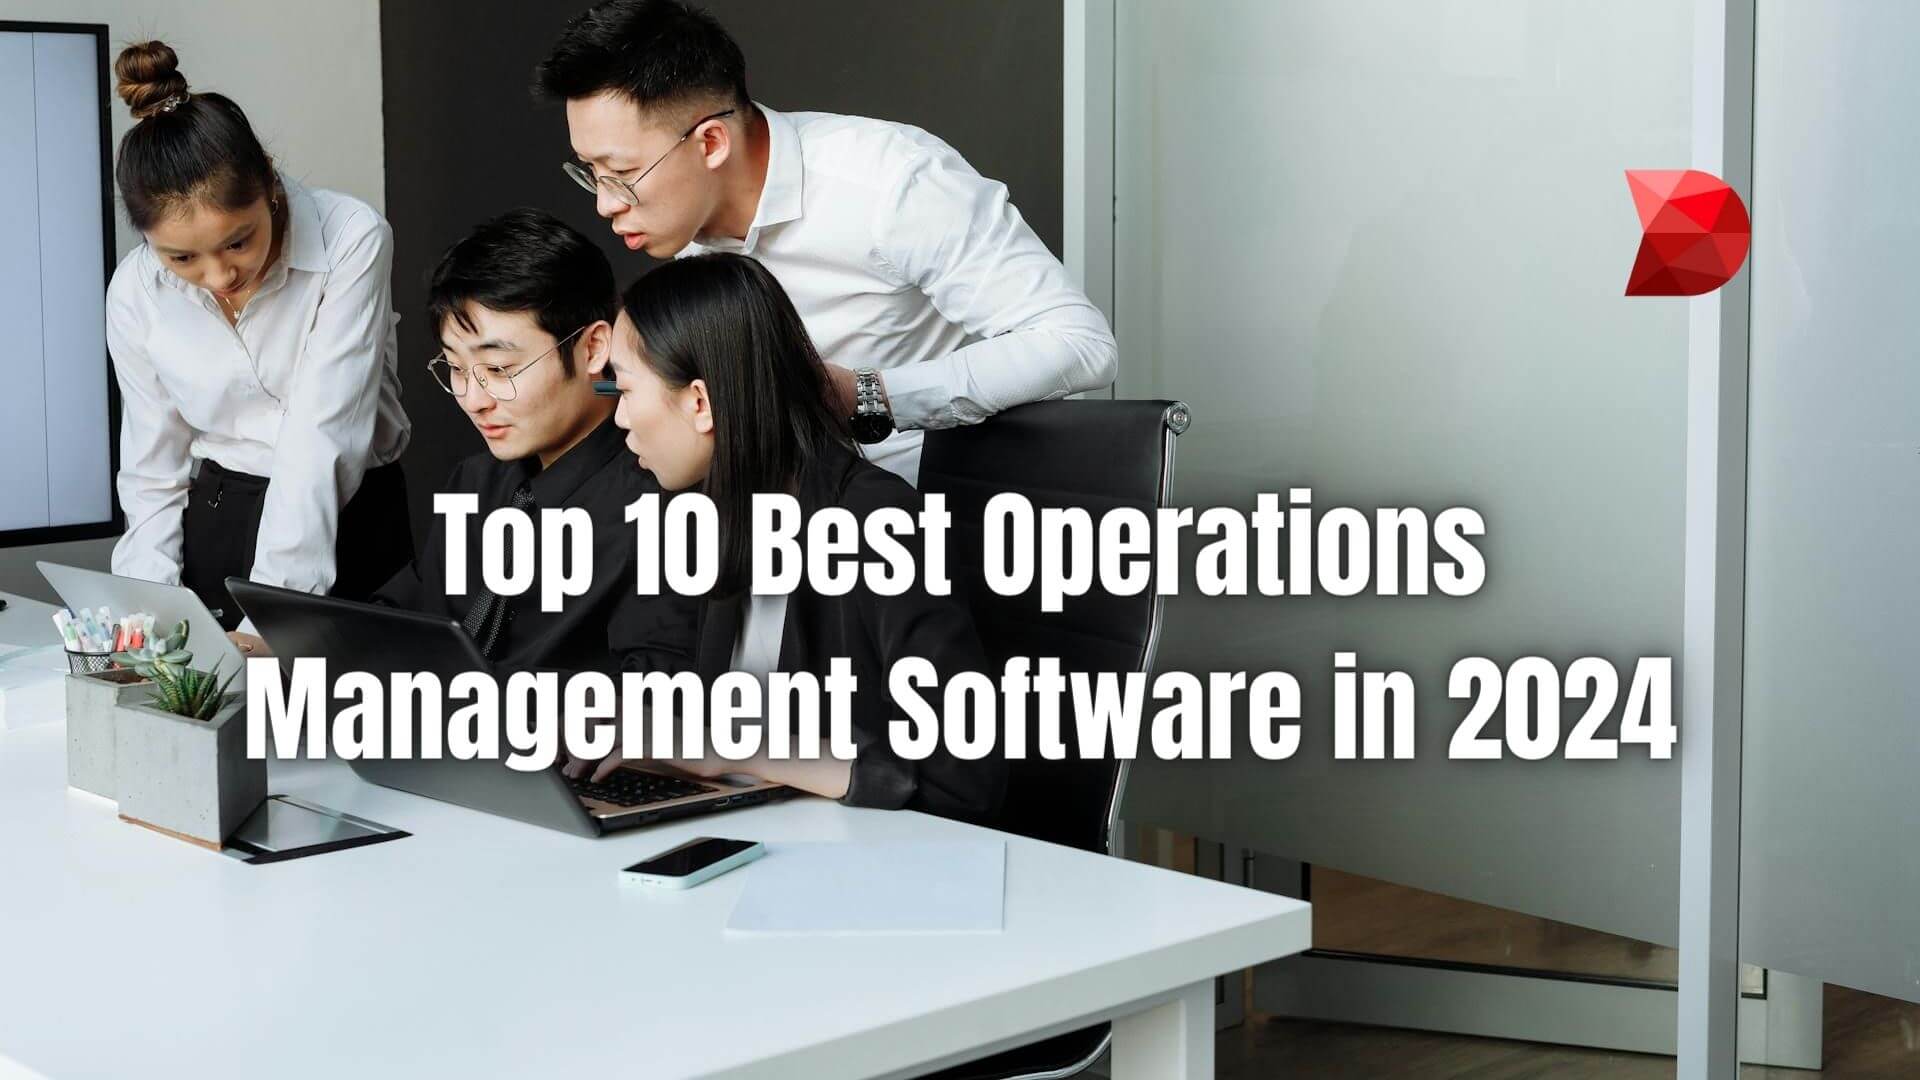 Revolutionize your workflow in 2024! Explore this guide to the top 10 operations management software for unparalleled business optimization.